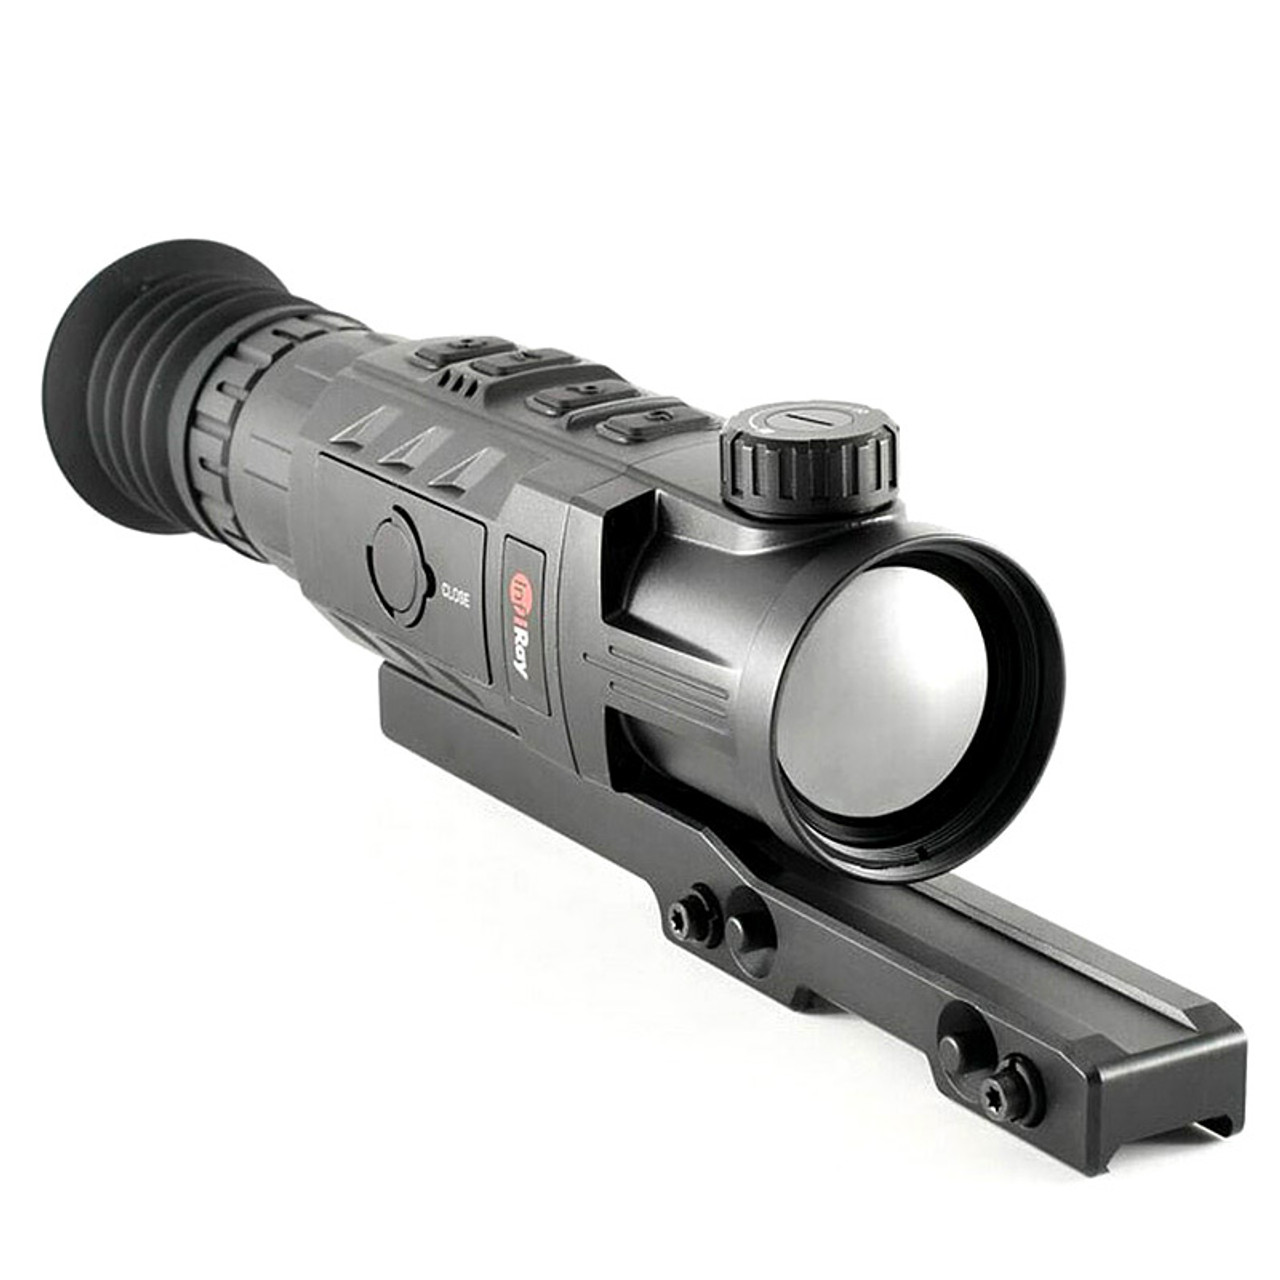 Rico MK1 640 50mm Thermal Weapon Sight by InfiRay Outdoor